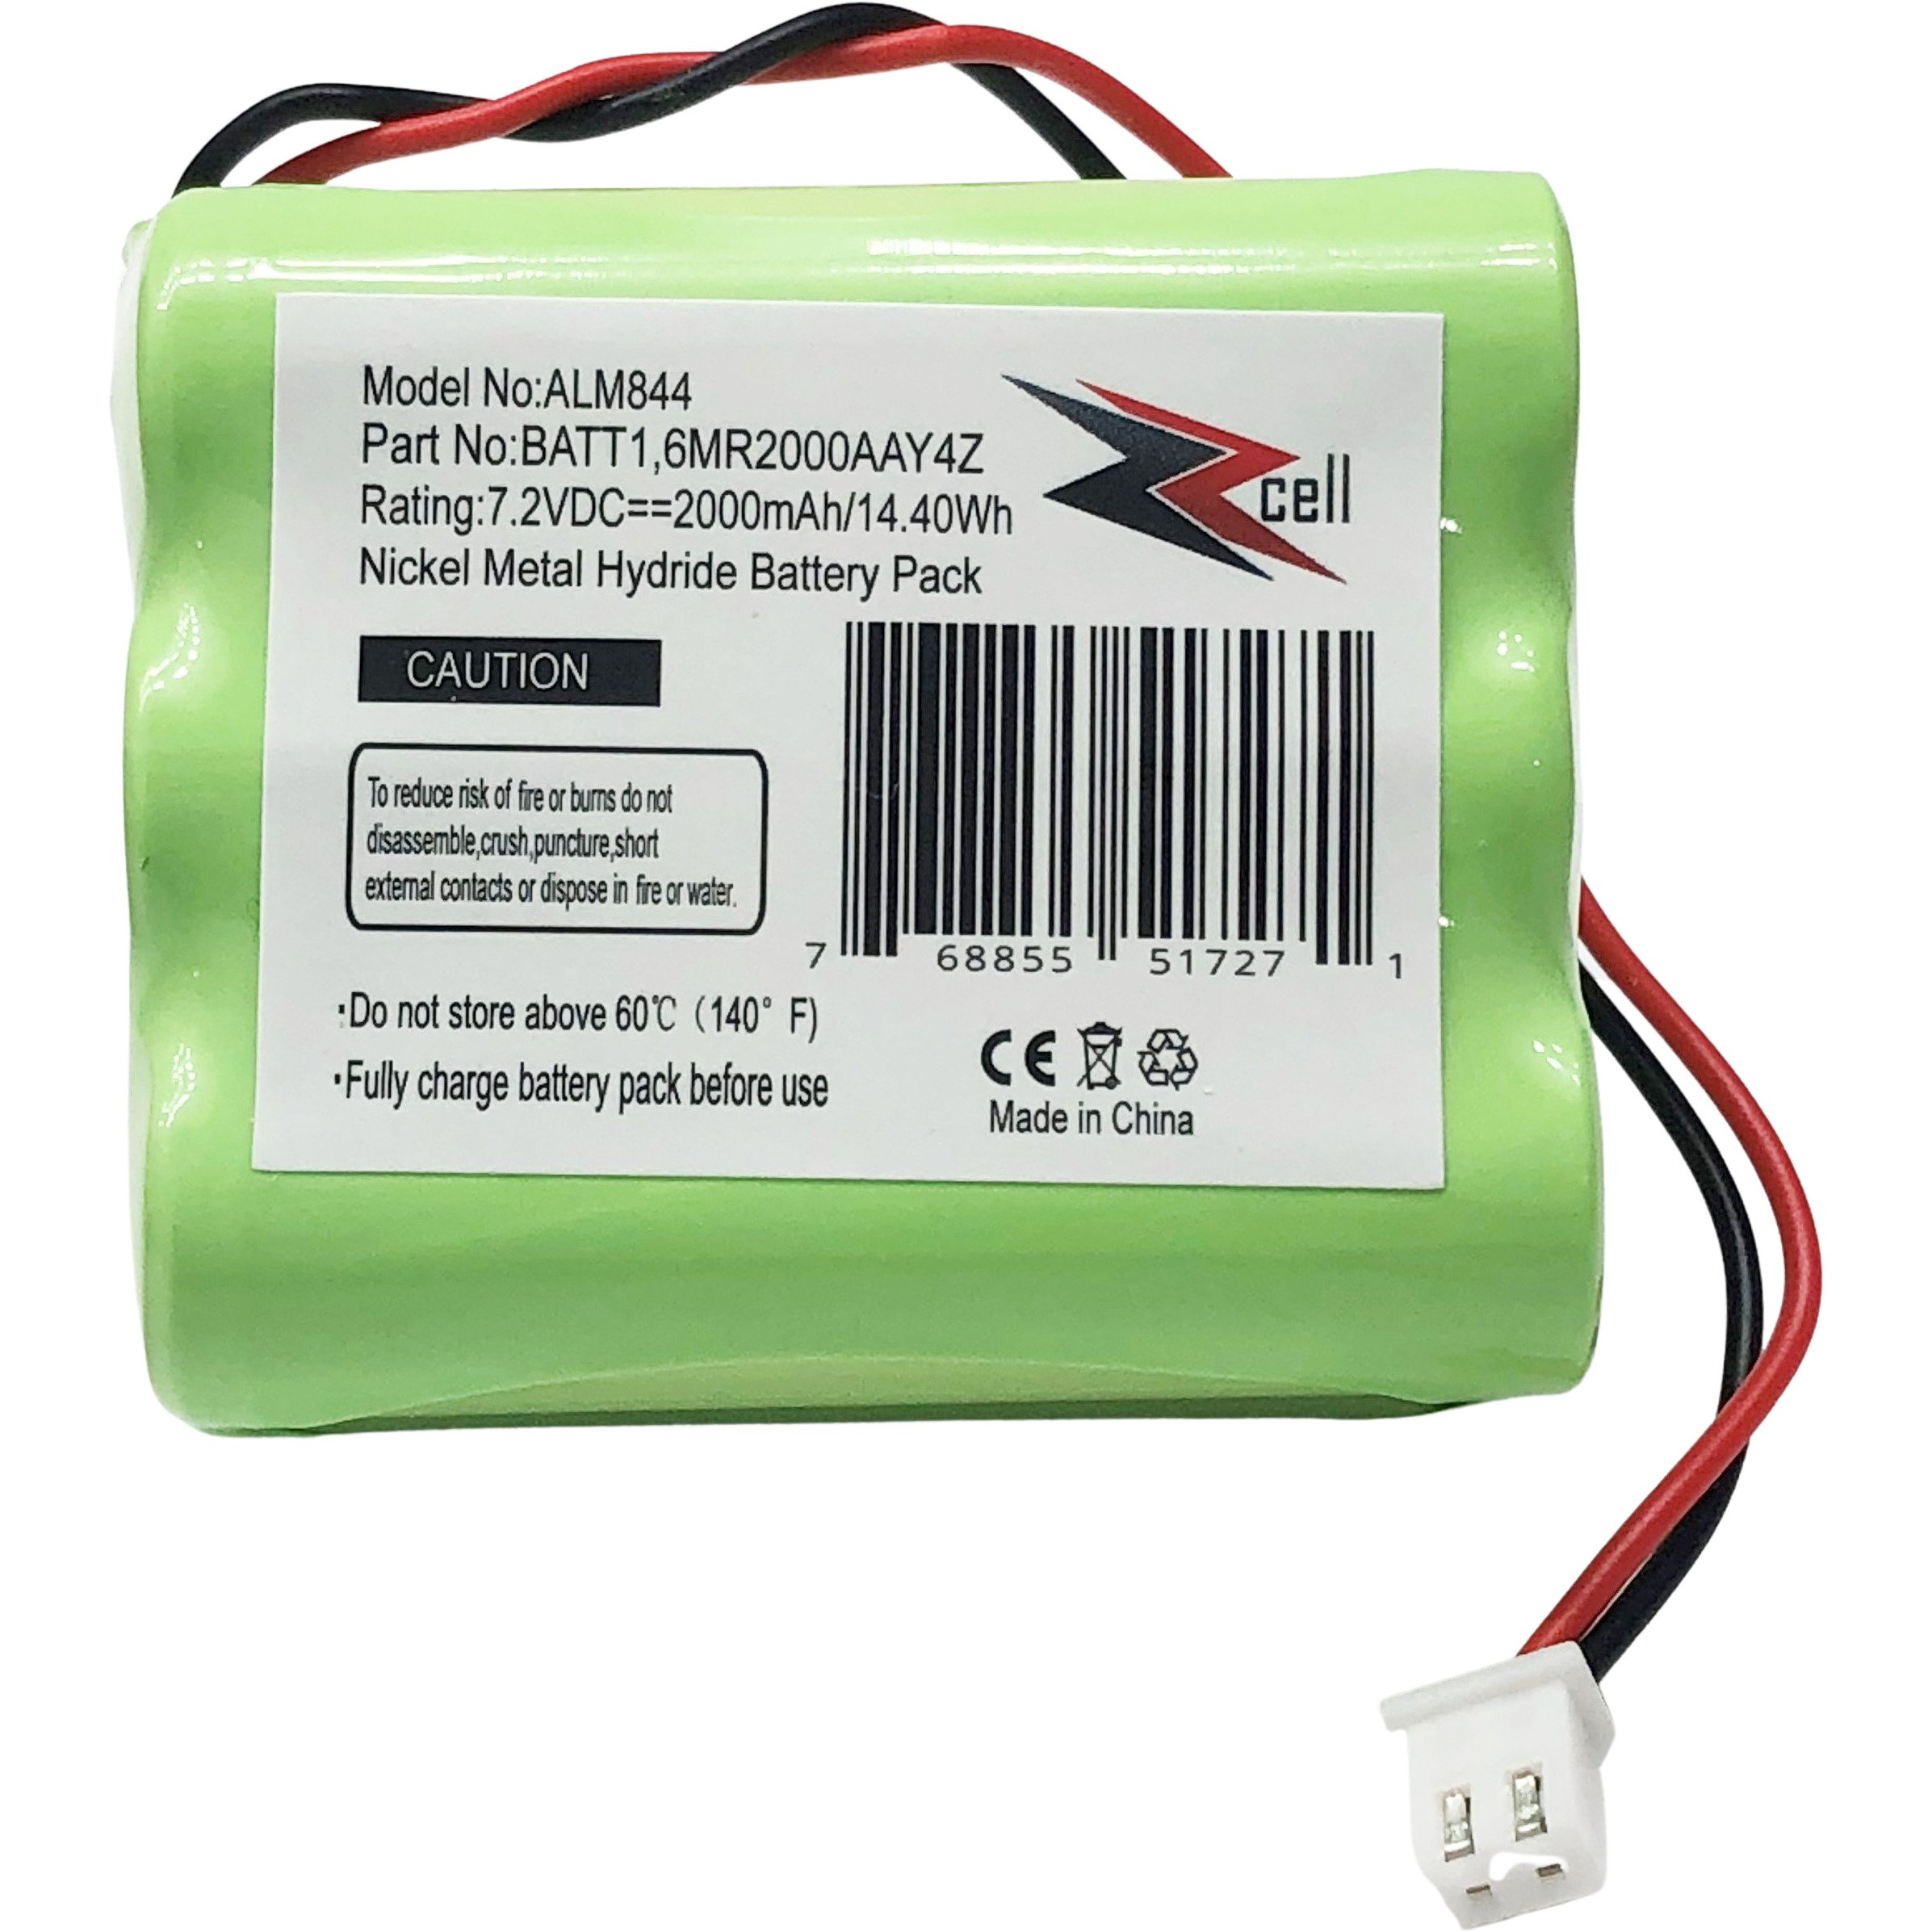 ZZcell Replacement Battery For 2Gig BATT1, BATT1X, BATT2X, 6MR2000AAY4Z, GC2 2GIG-CNTRL2 2GIG-CP2, GCKIT311, 228844, Go Control Panel Alarm System 10-000013-001, PERS-4200 - image 4 of 6